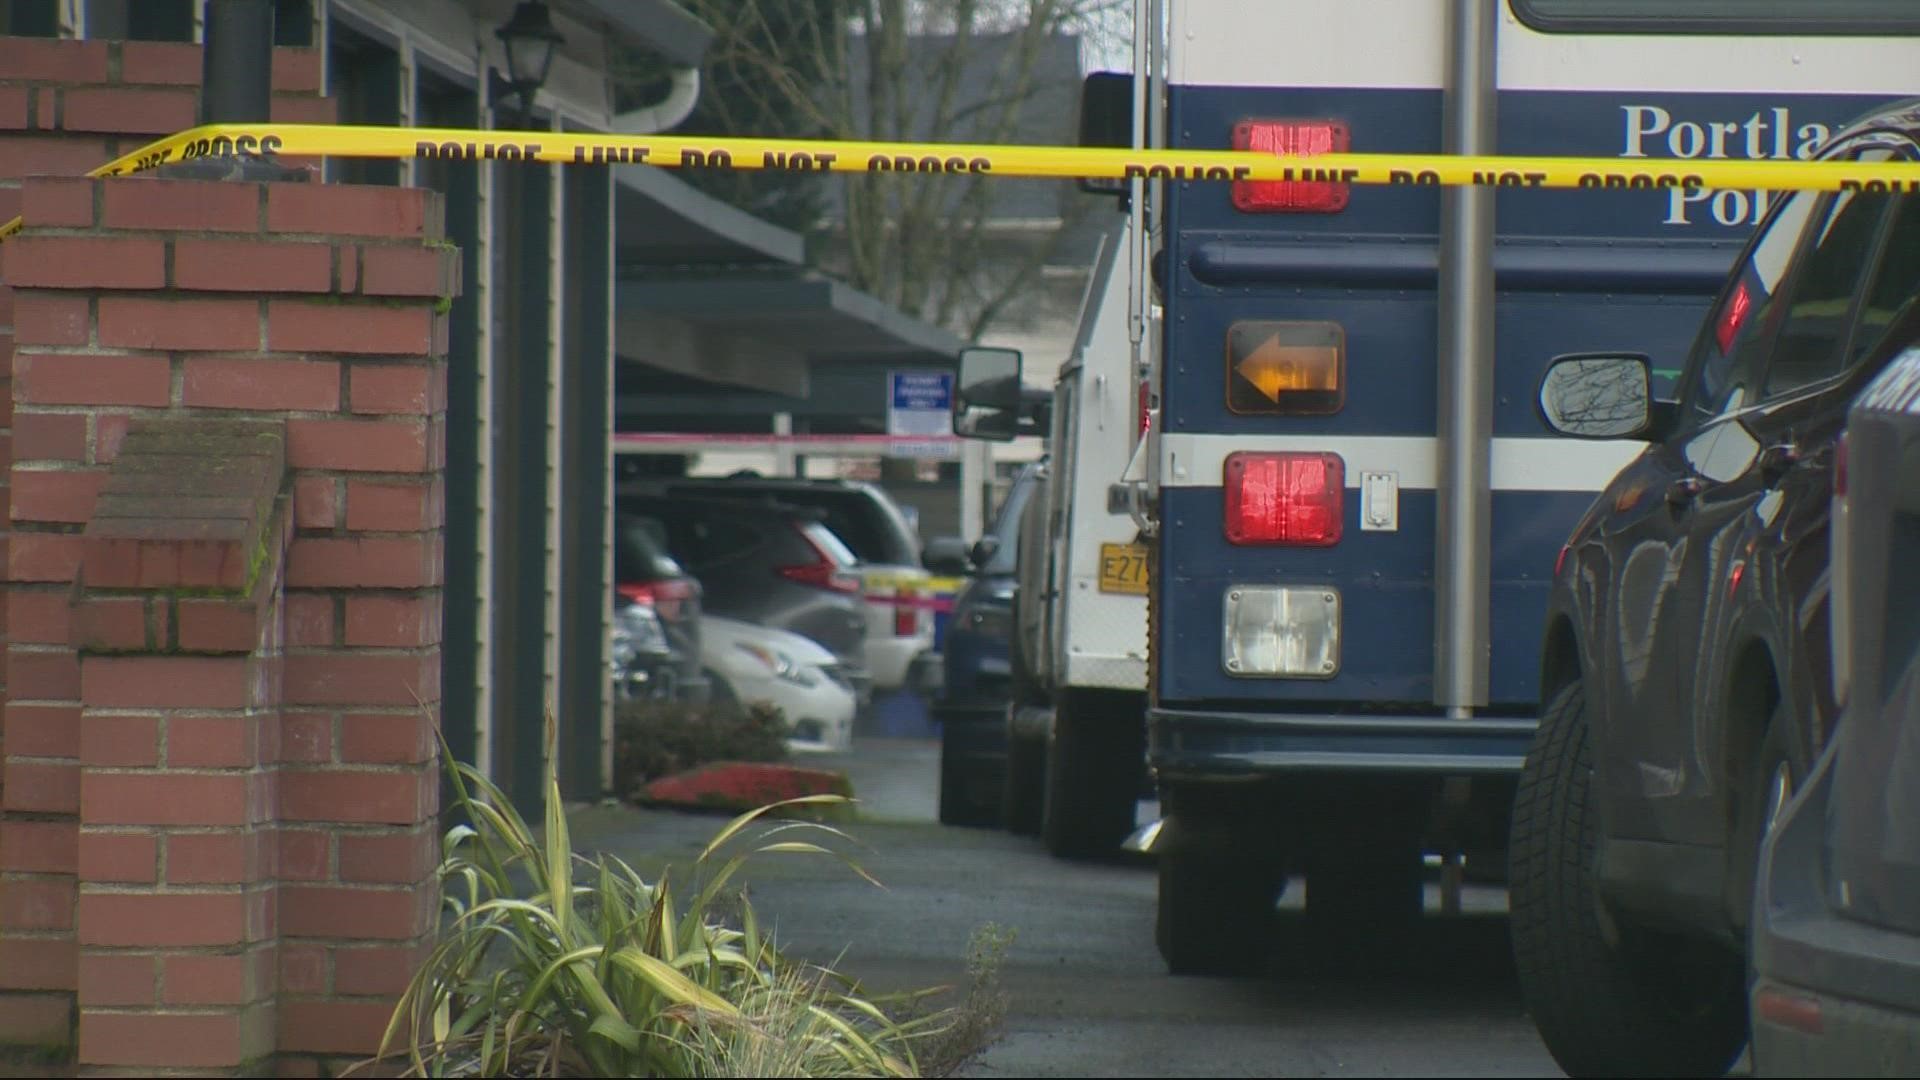 Portland police said the shooting happened early Saturday morning at an apartment on Northeast 131st Place.